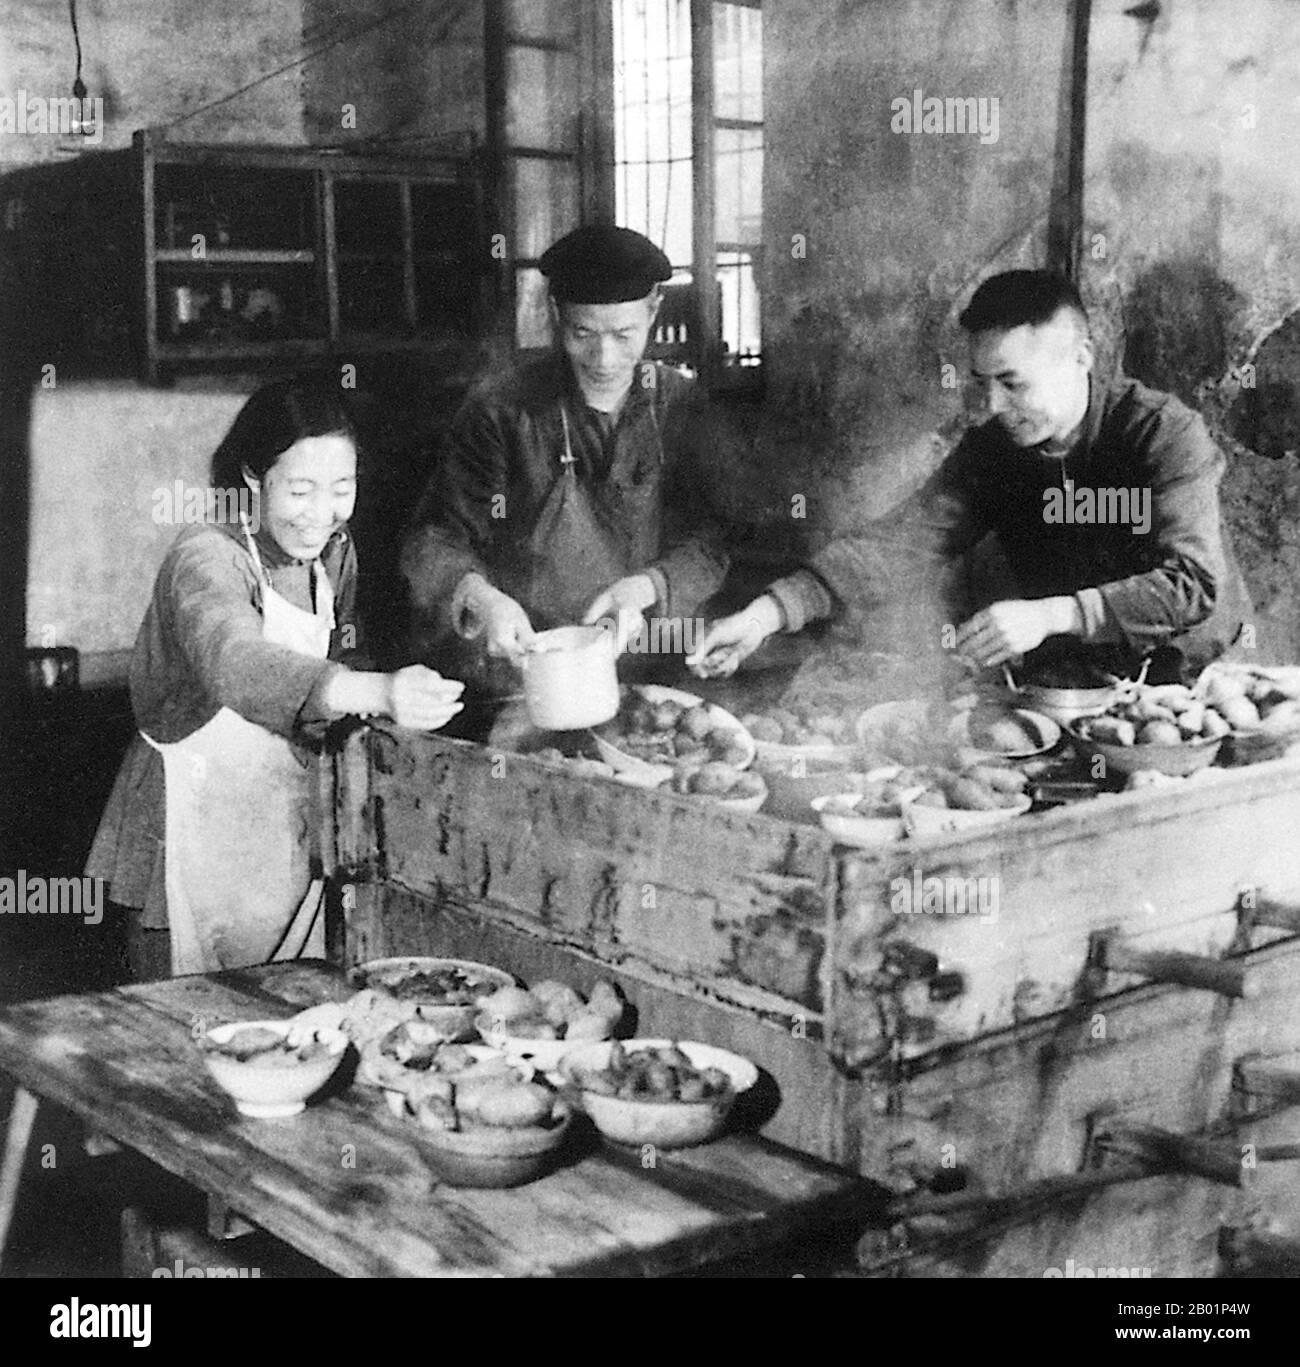 China: Workers preparing food in a communal kitchen during the Great Leap Forward (1958-1961).  The Great Leap Forward of the People's Republic of China (PRC) was an economic and social campaign of the Communist Party of China (CPC), reflected in planning decisions from 1958 to 1961, which aimed to use China's vast population to rapidly transform the country from an agrarian economy into a modern communist society through the process of rapid industrialisation, and collectivisation. Mao Zedong led the campaign based on the Theory of Productive Forces. Stock Photo